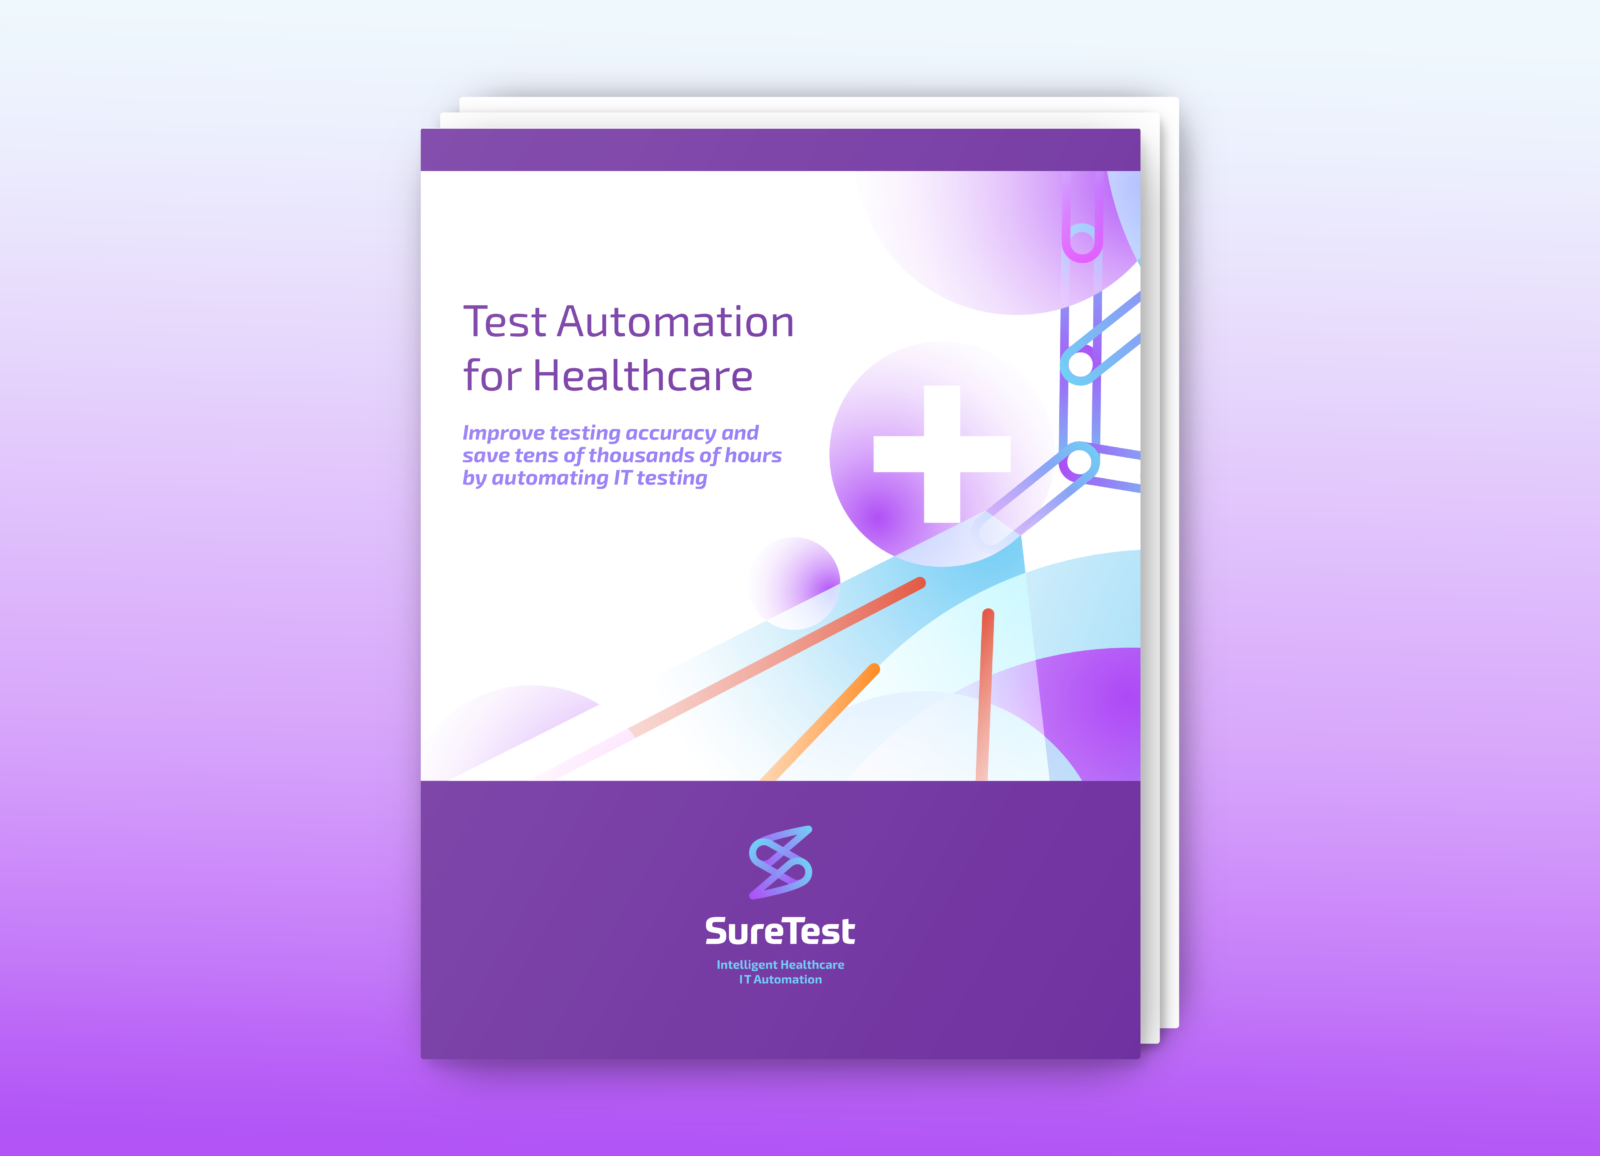 Test Automation for Healthcare - Improve testing accuracy & save thousands of hours!